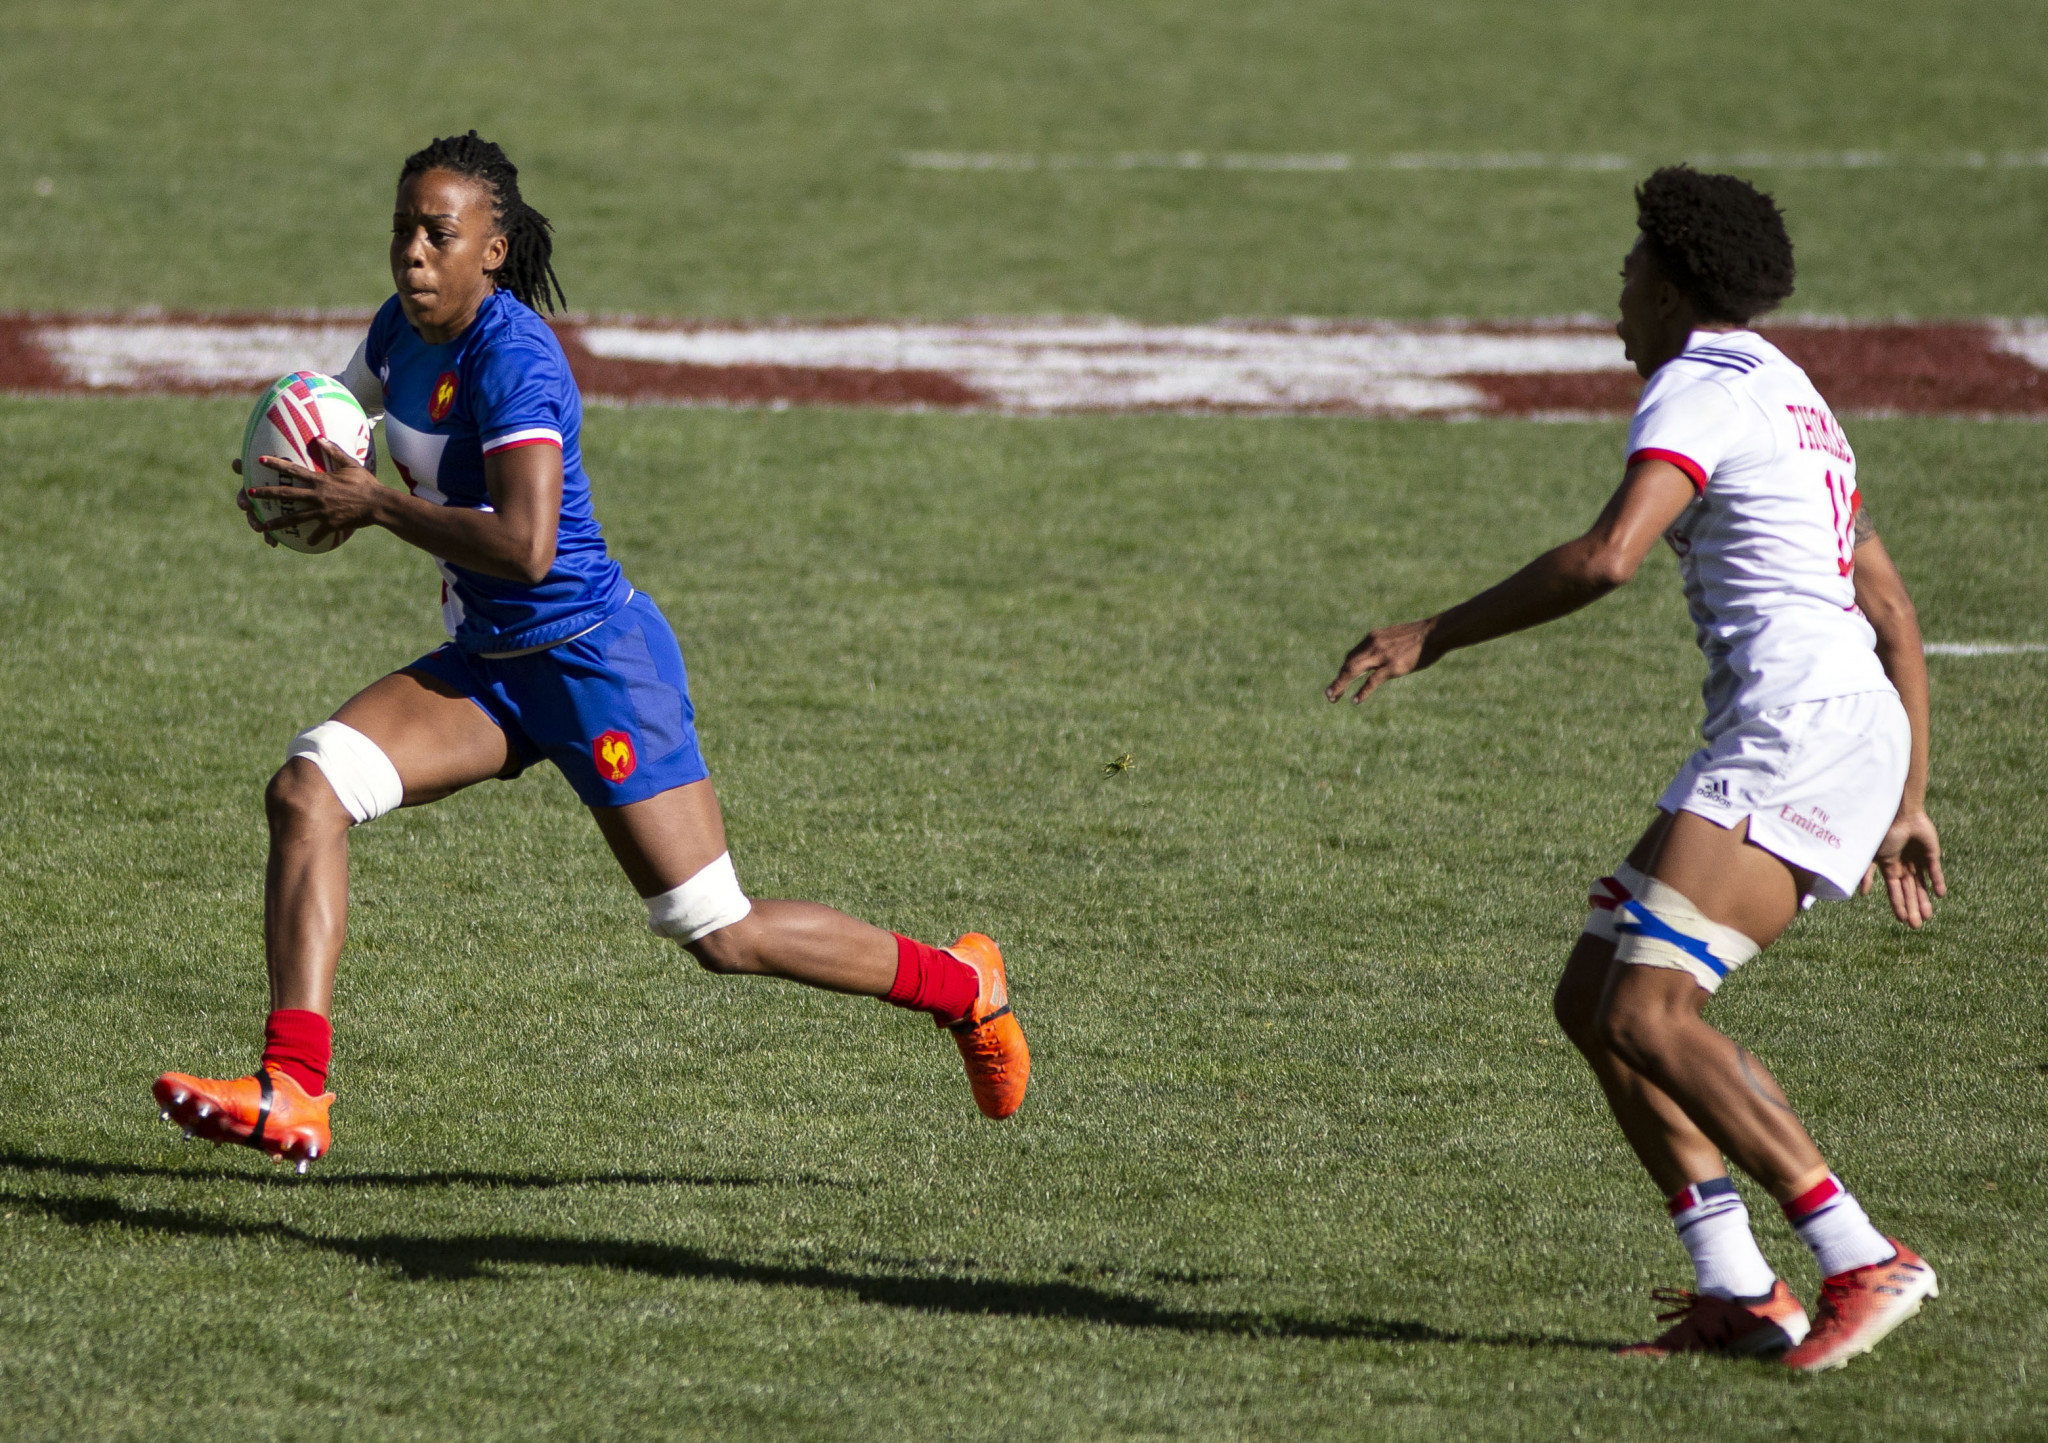 France finished as the silver medallists in the Rugby World Cup Sevens women's competition ©Getty Images